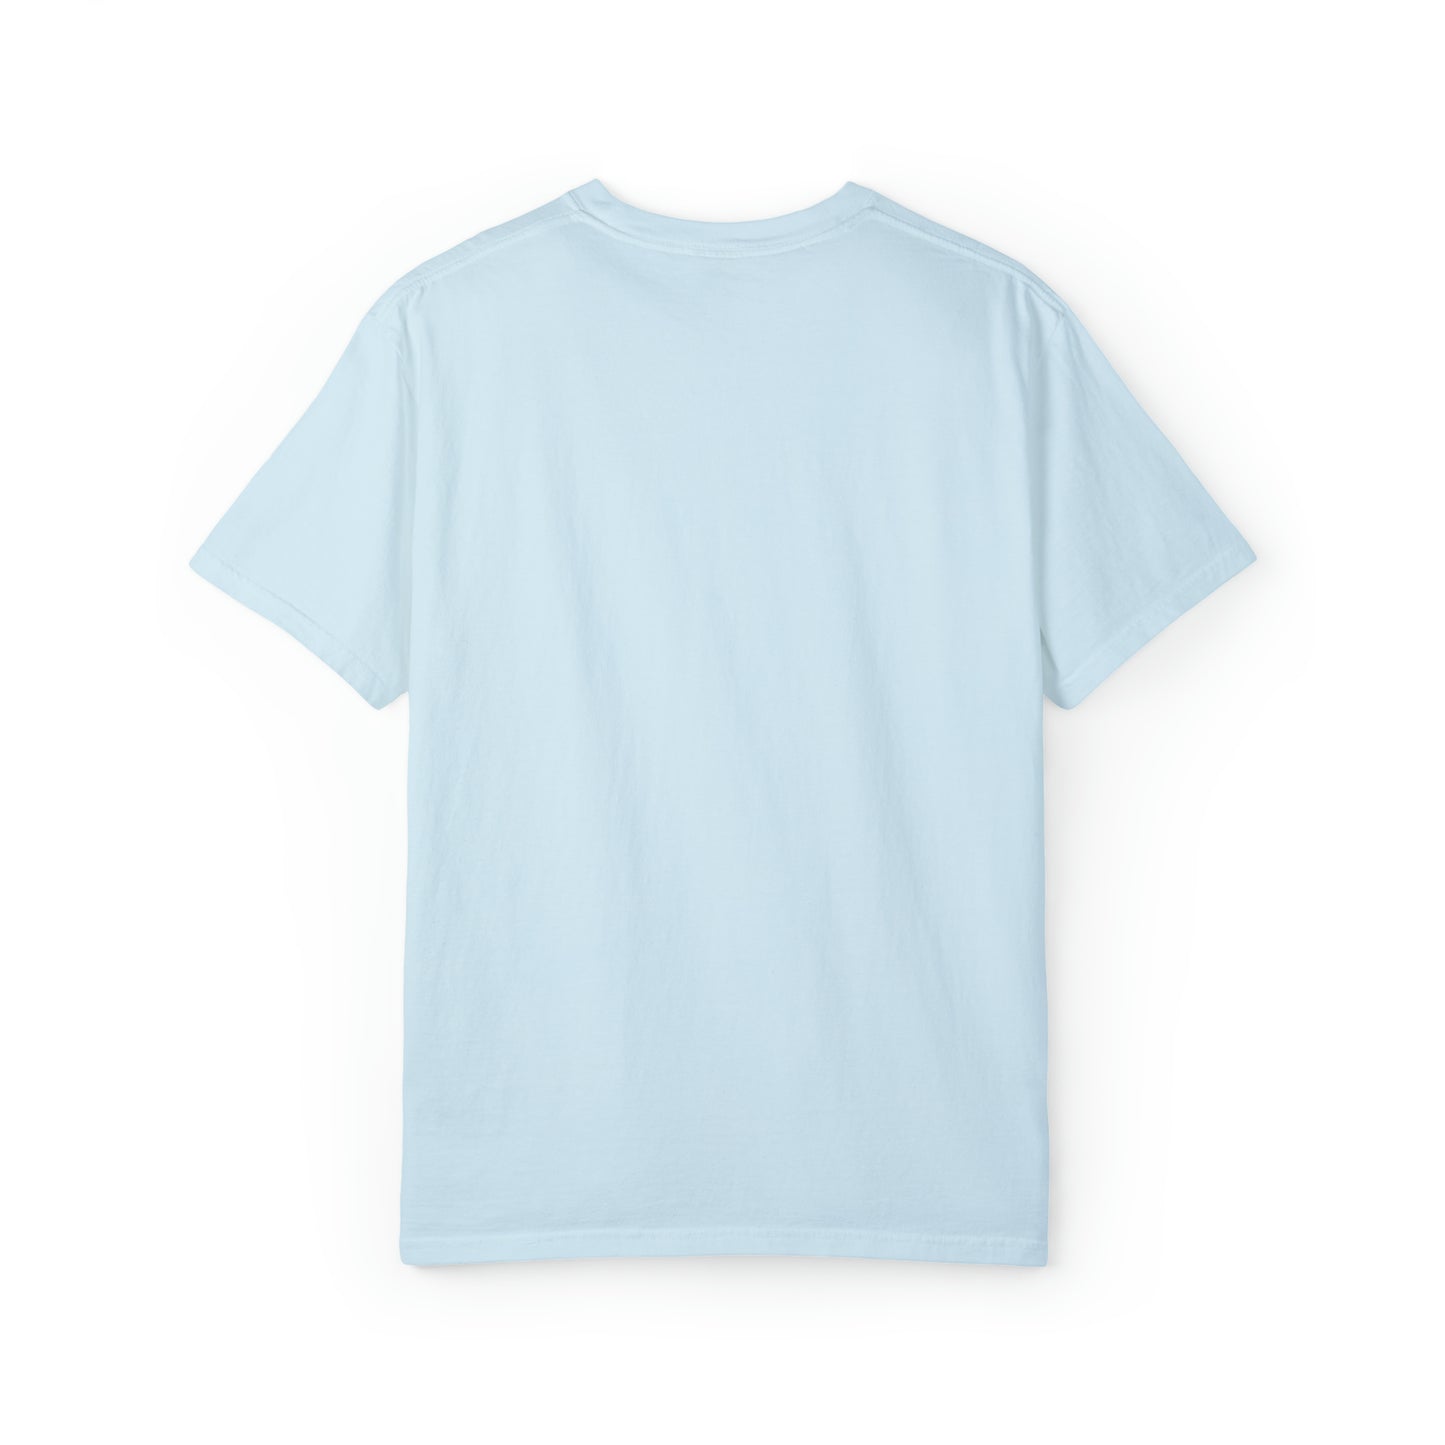 Copy of Copy of Copy of Unisex Garment-Dyed T-shirt